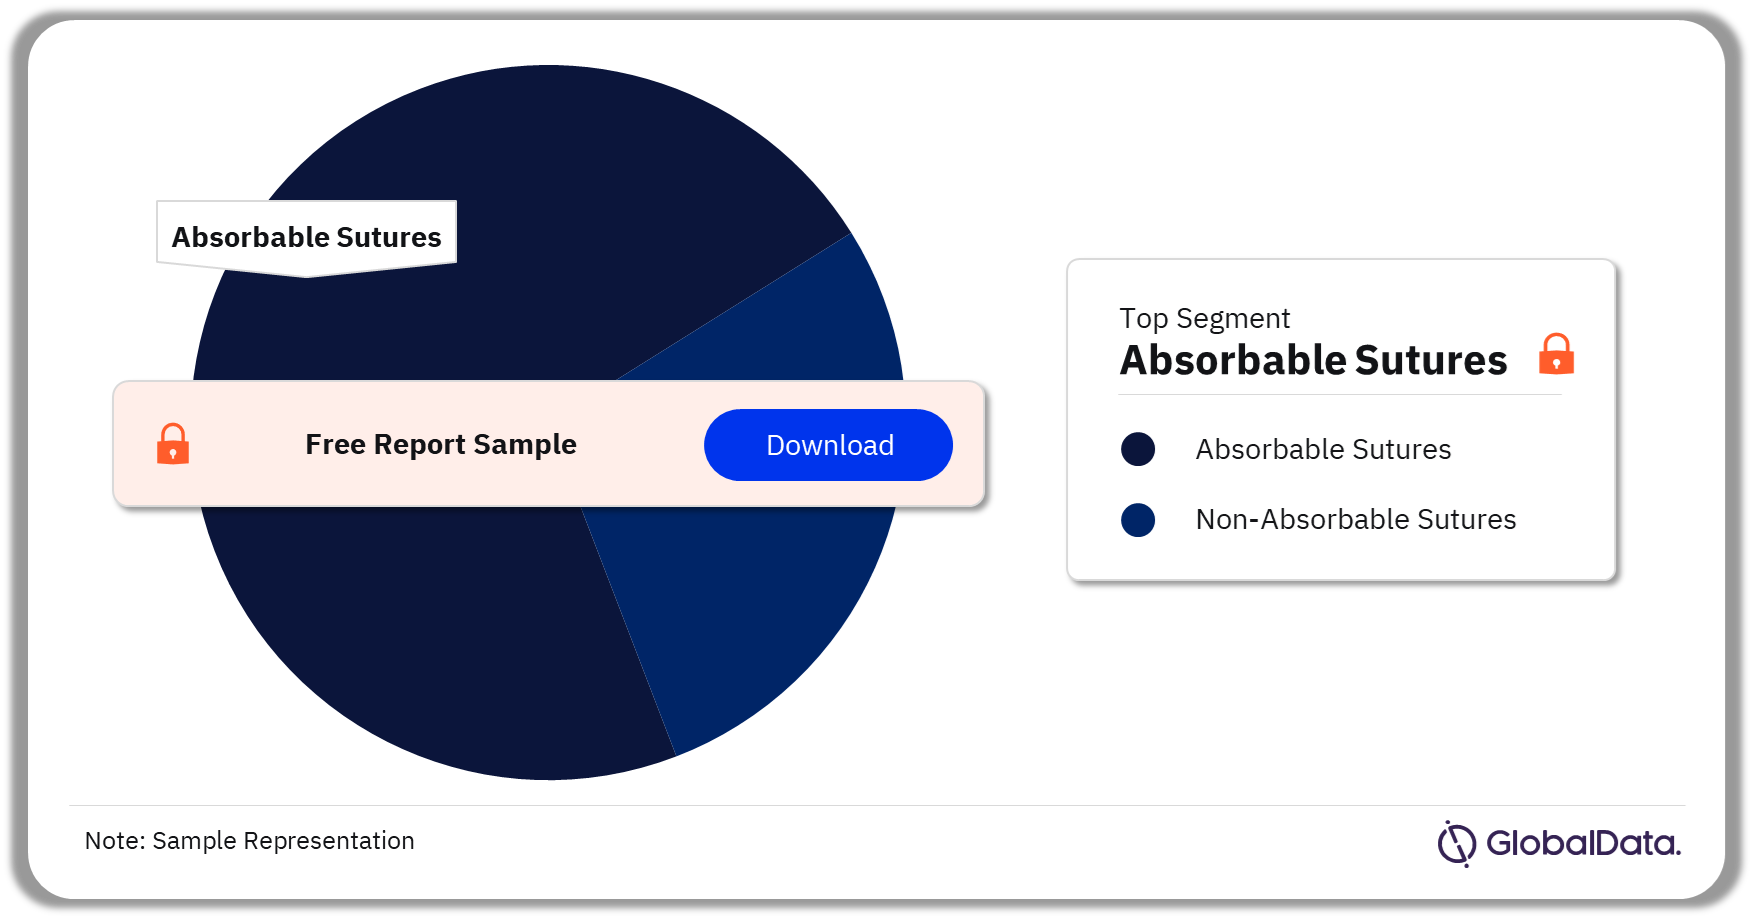 Surgical Sutures Market Analysis by Segments, 2023 (%)